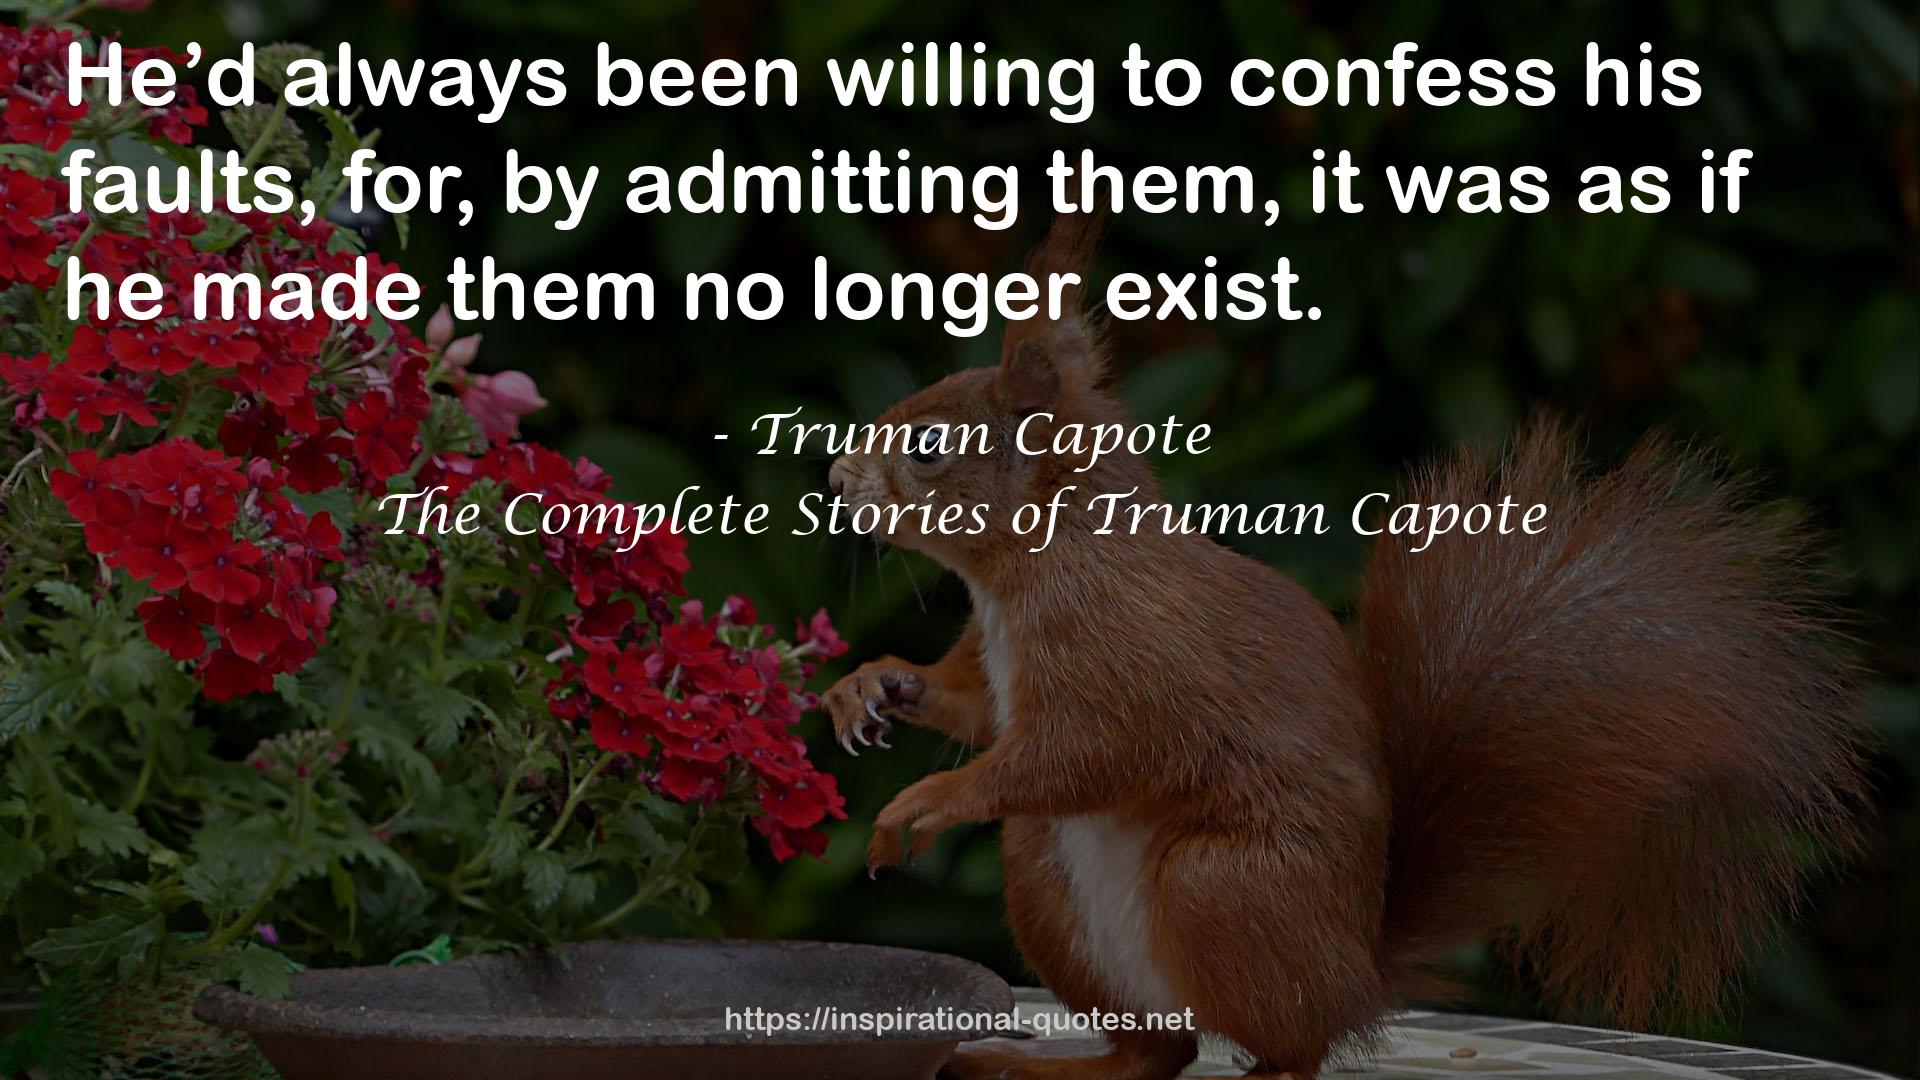 The Complete Stories of Truman Capote QUOTES